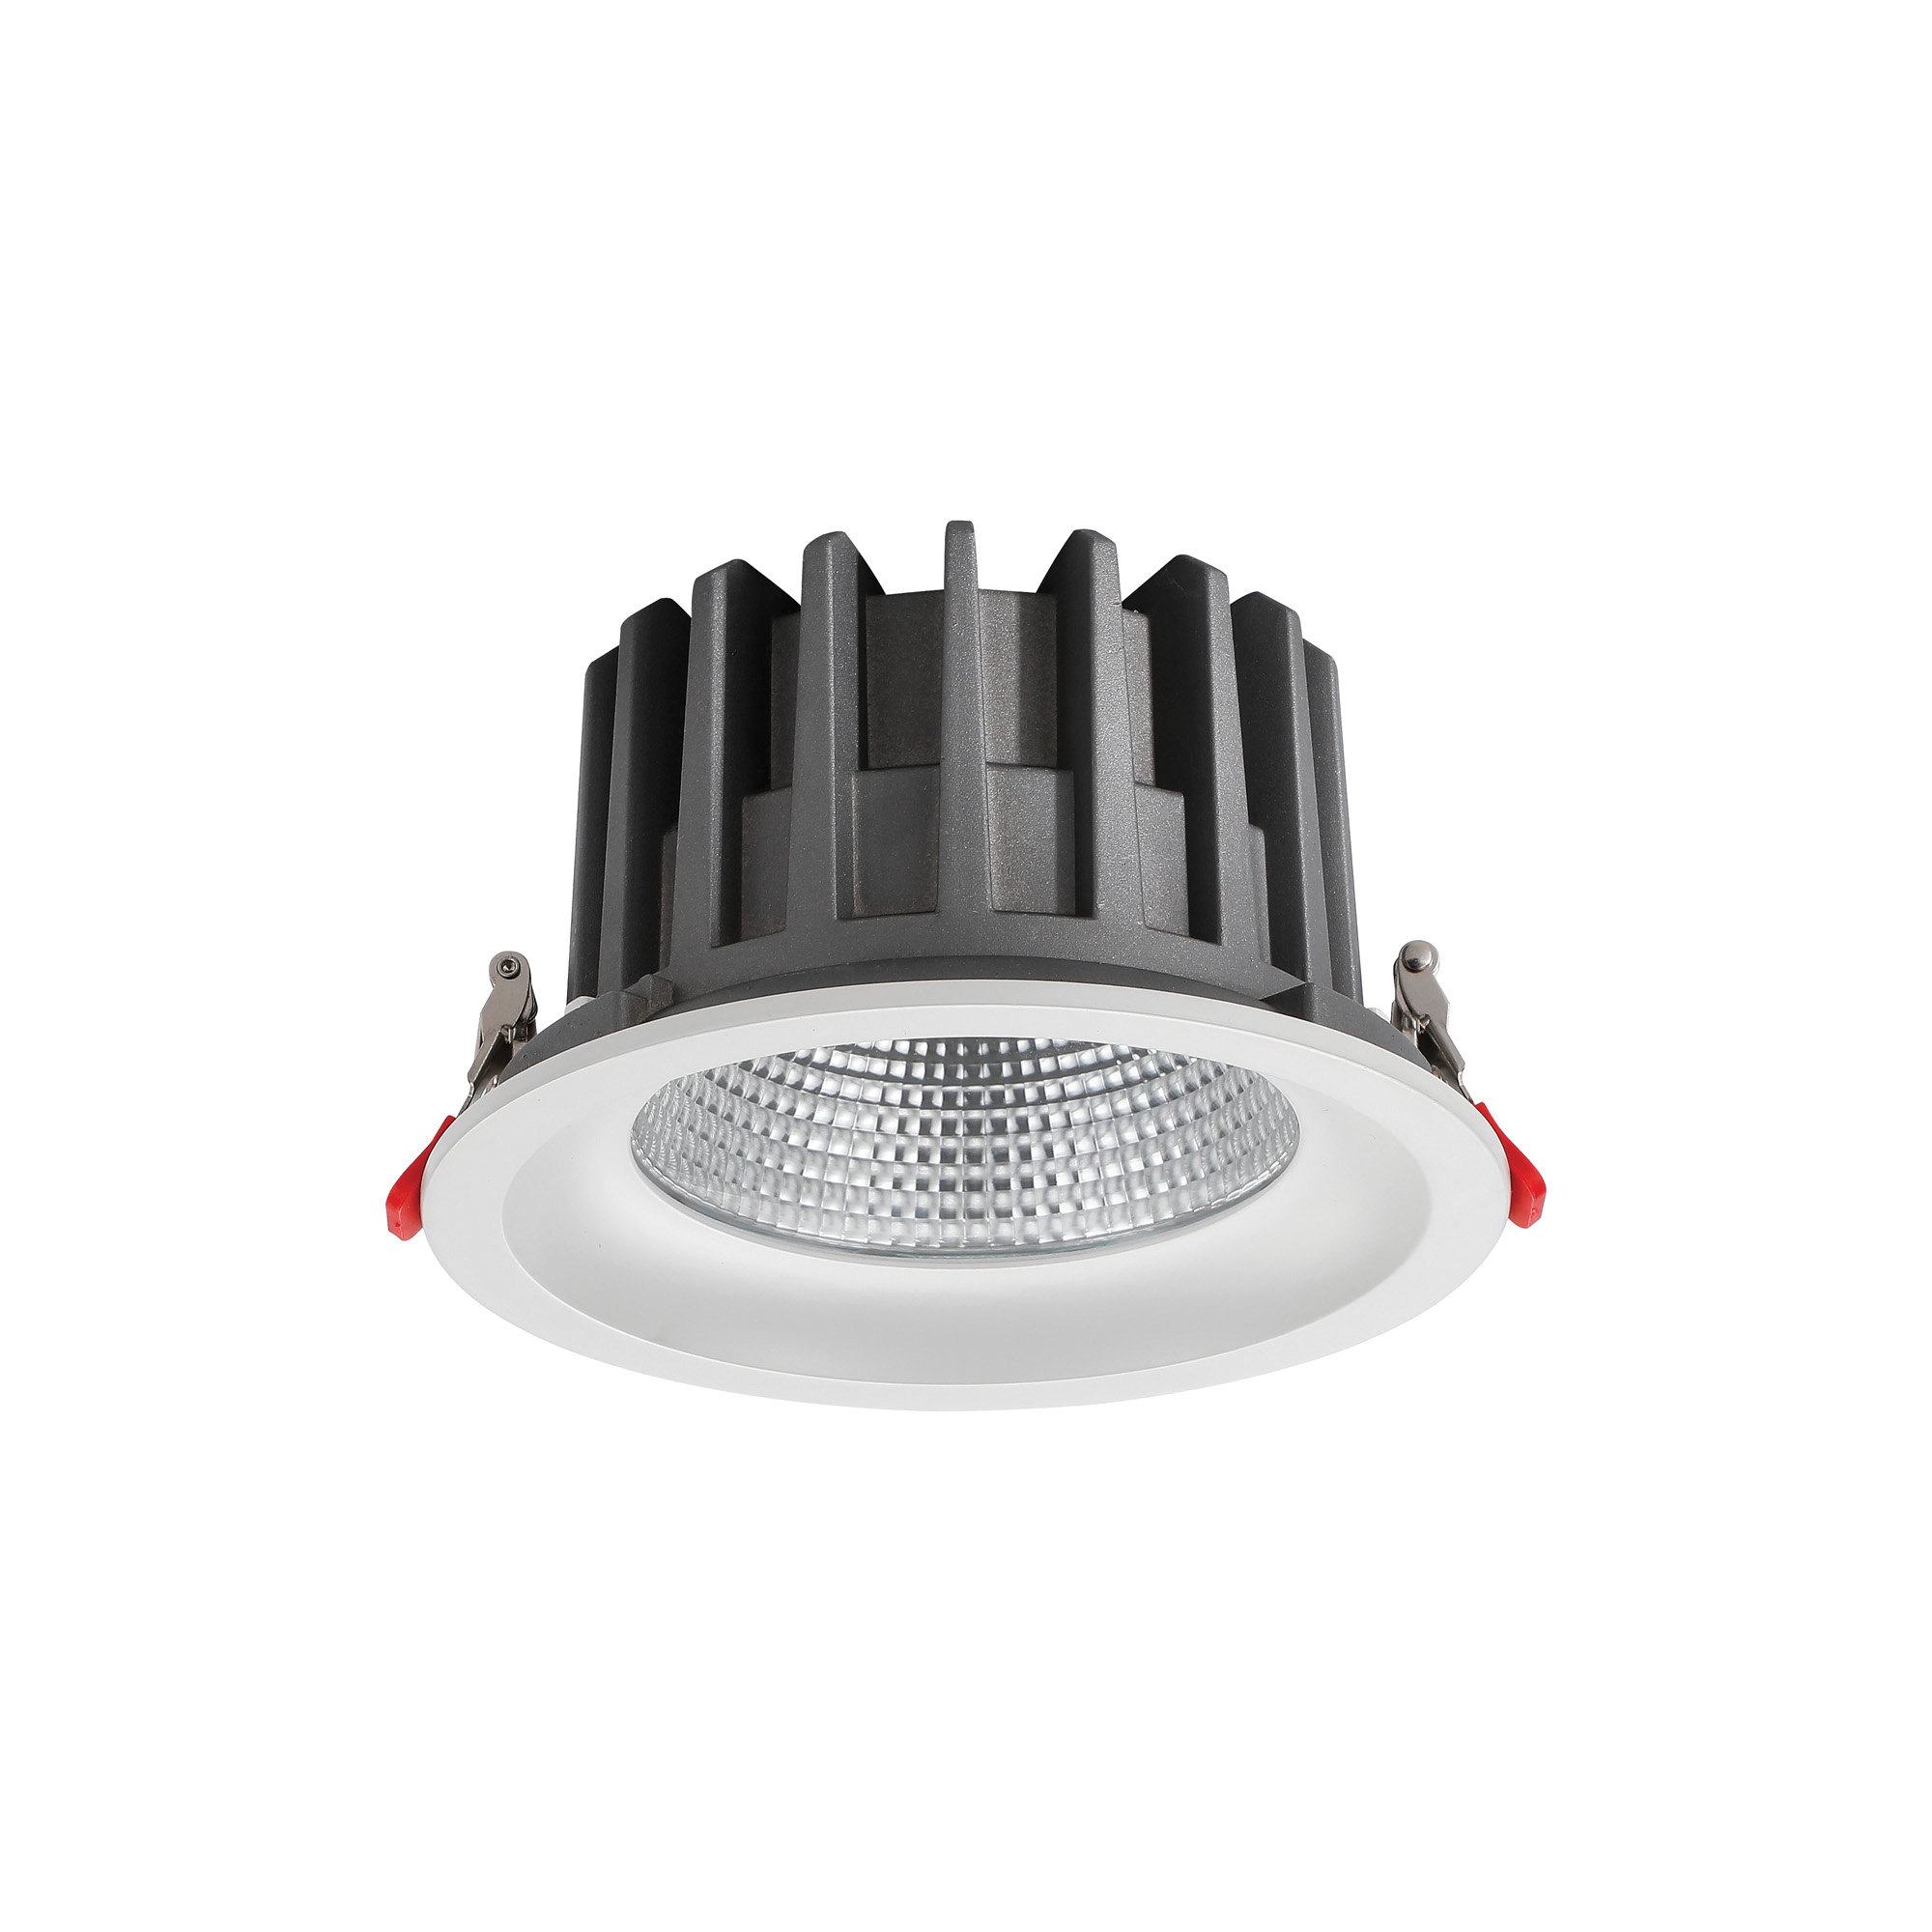 DL200065  Bionic 40, 40W, 1000mA, White Deep Round Recessed Downlight, 3540lm ,Cut Out 175mm, 40° , 4000K, IP44, DRIVER INC., 5yrs Warranty.